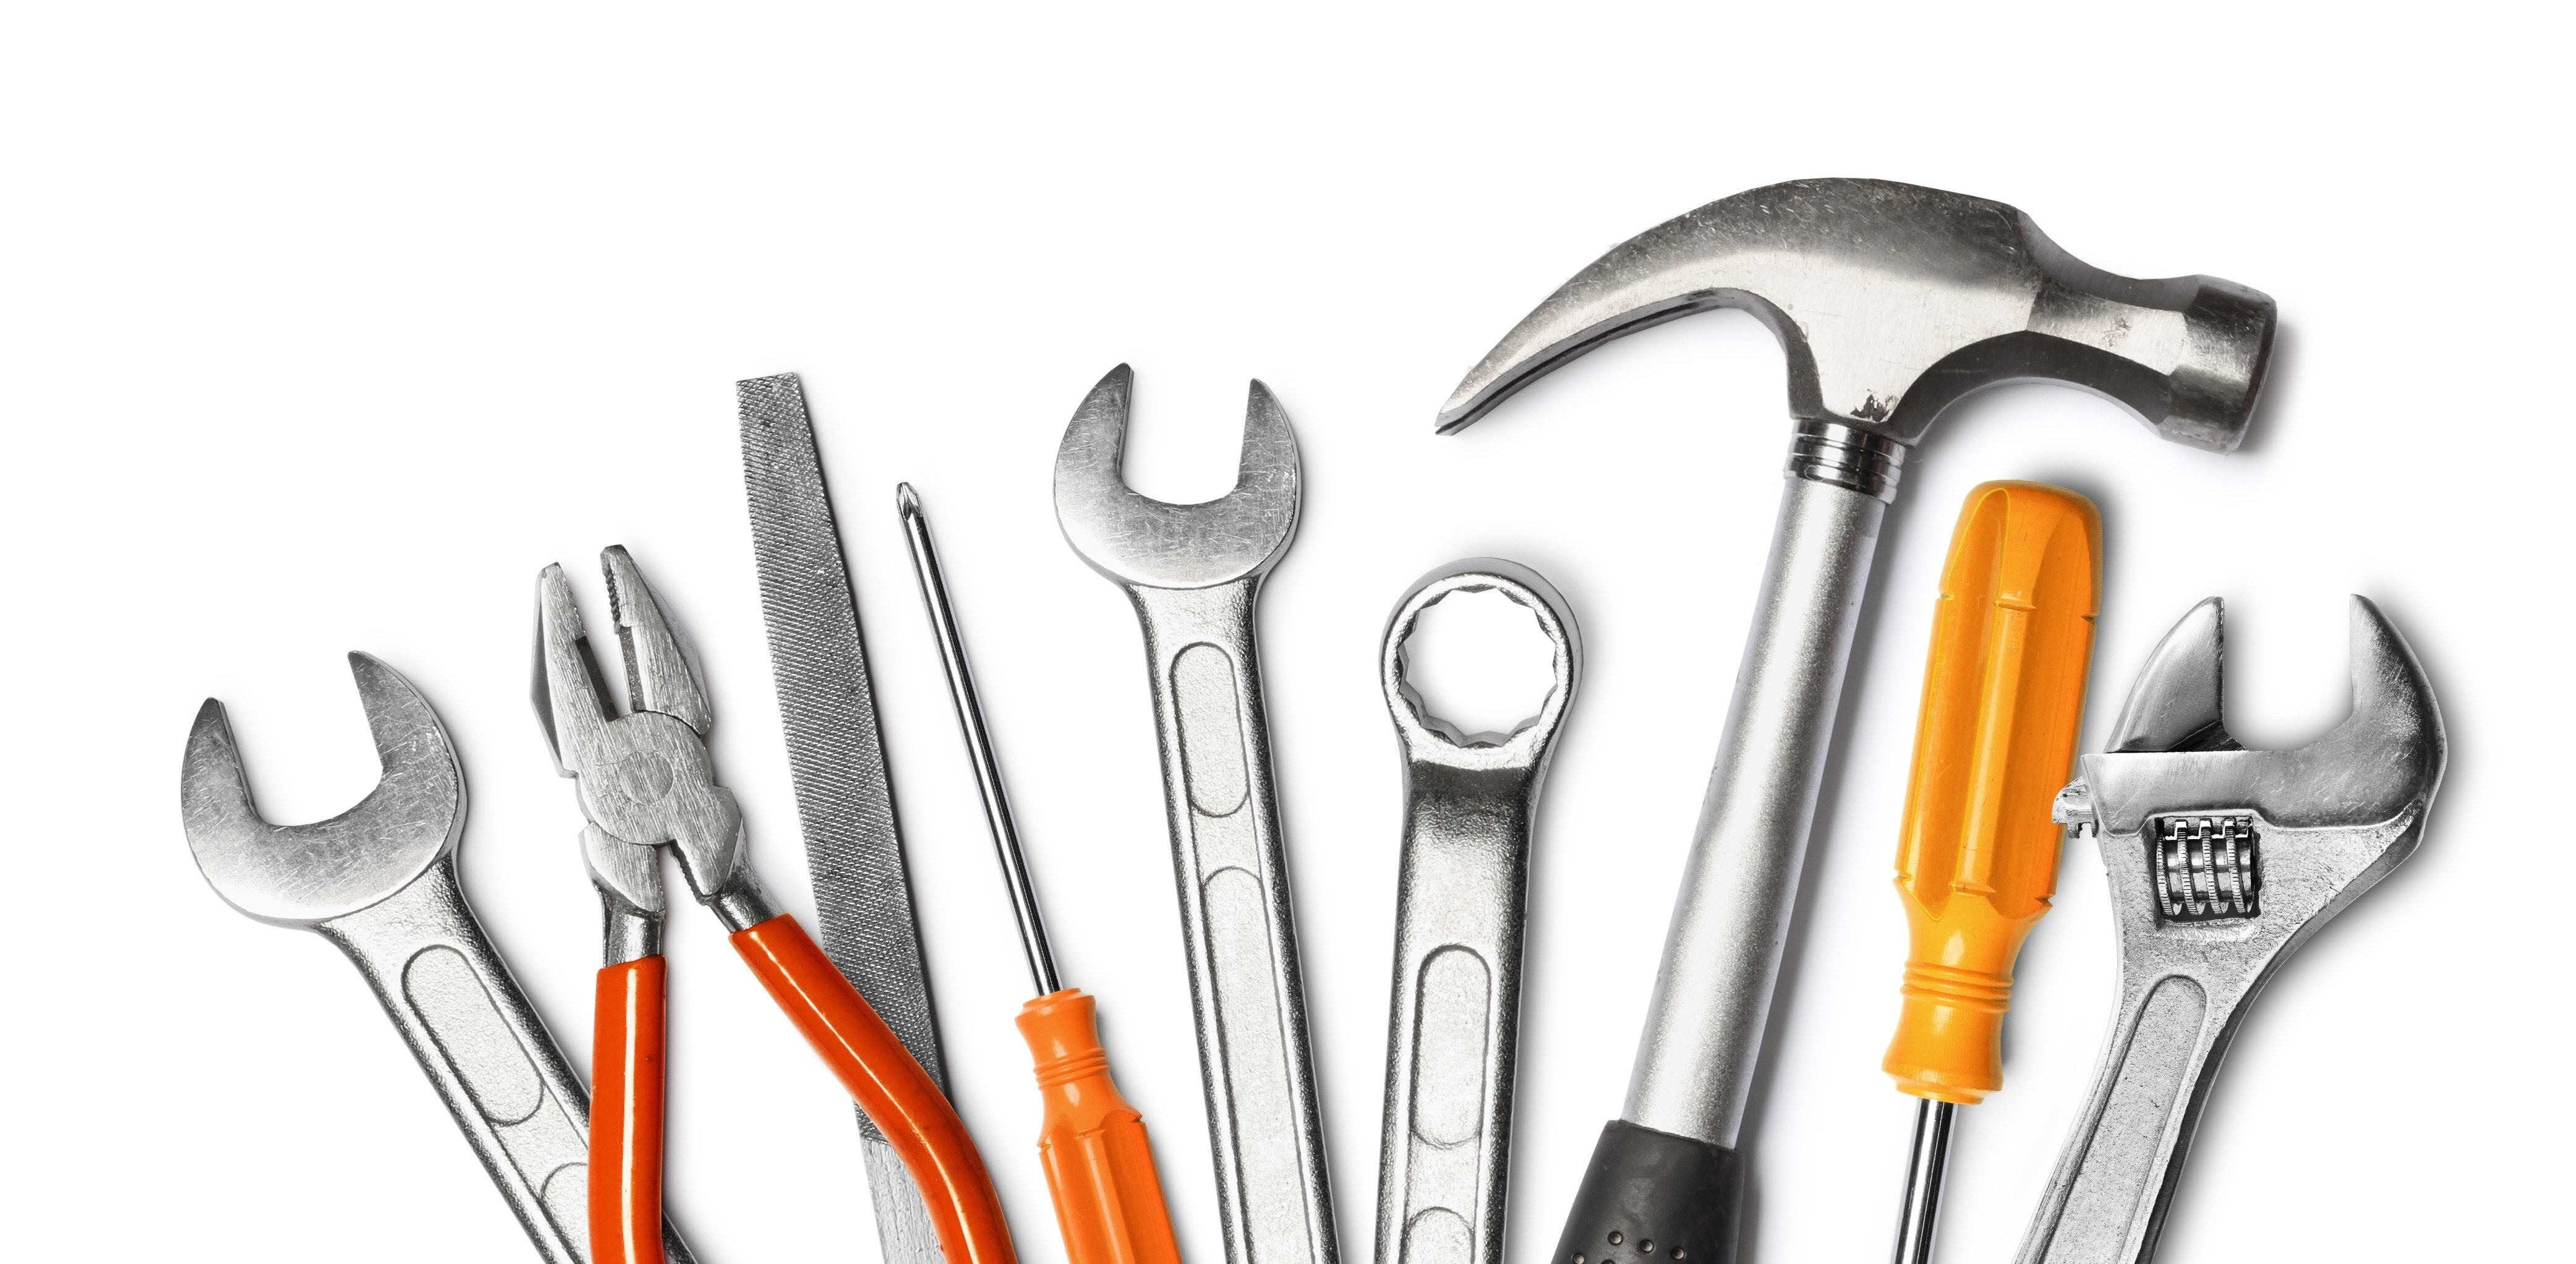 Importance Of Selecting The Right Tools For The Job